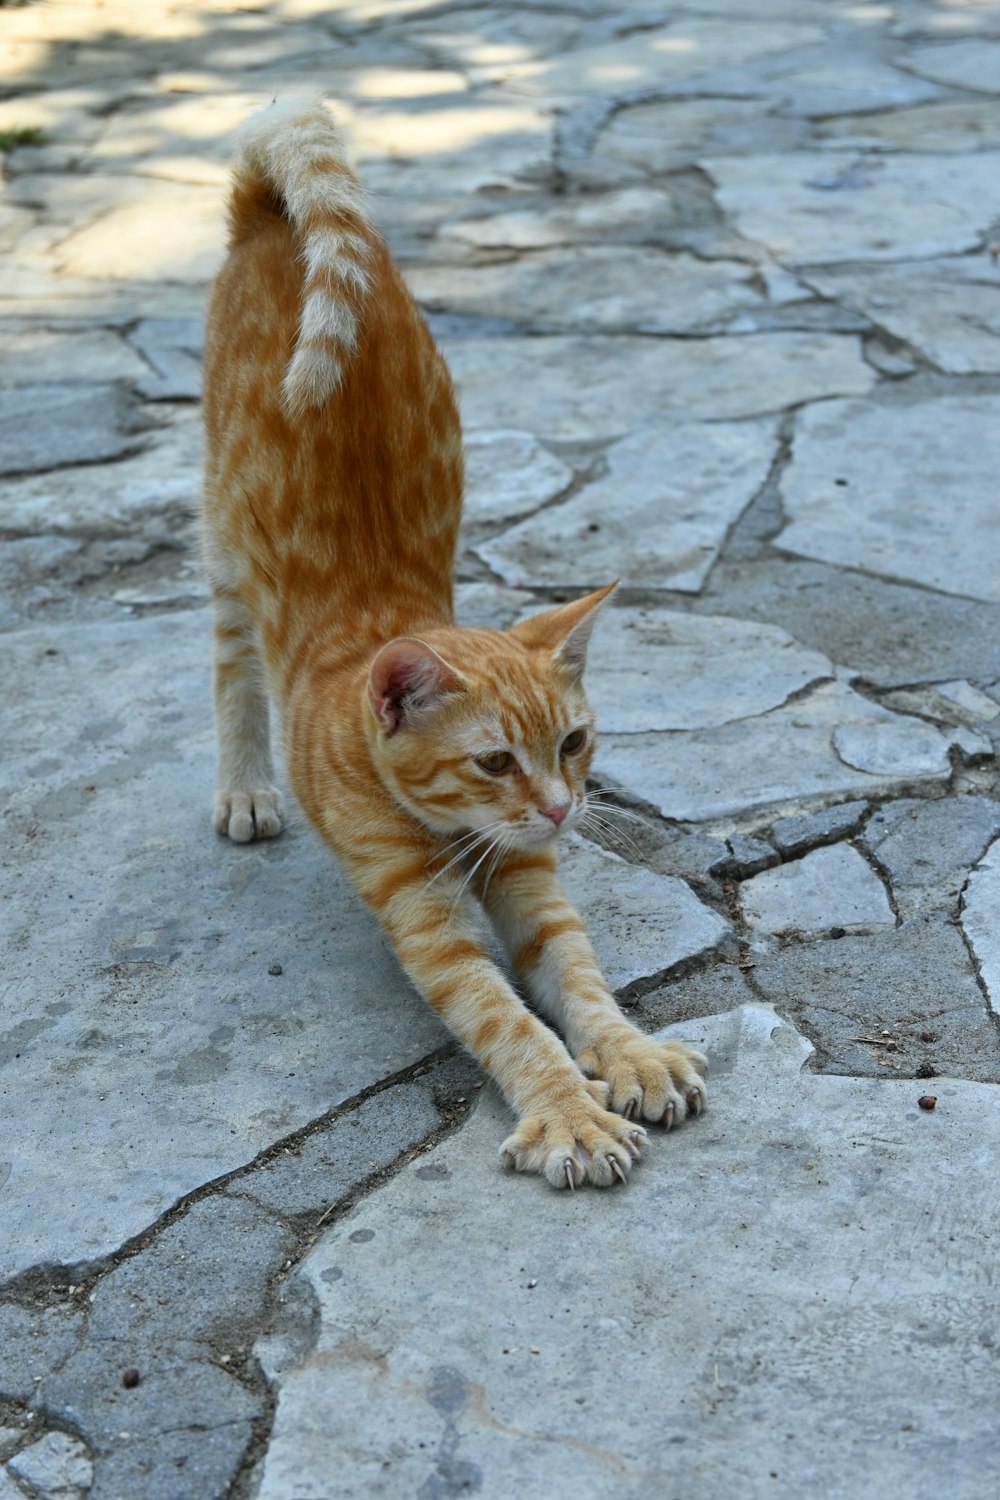 a cat walking on a stone surface